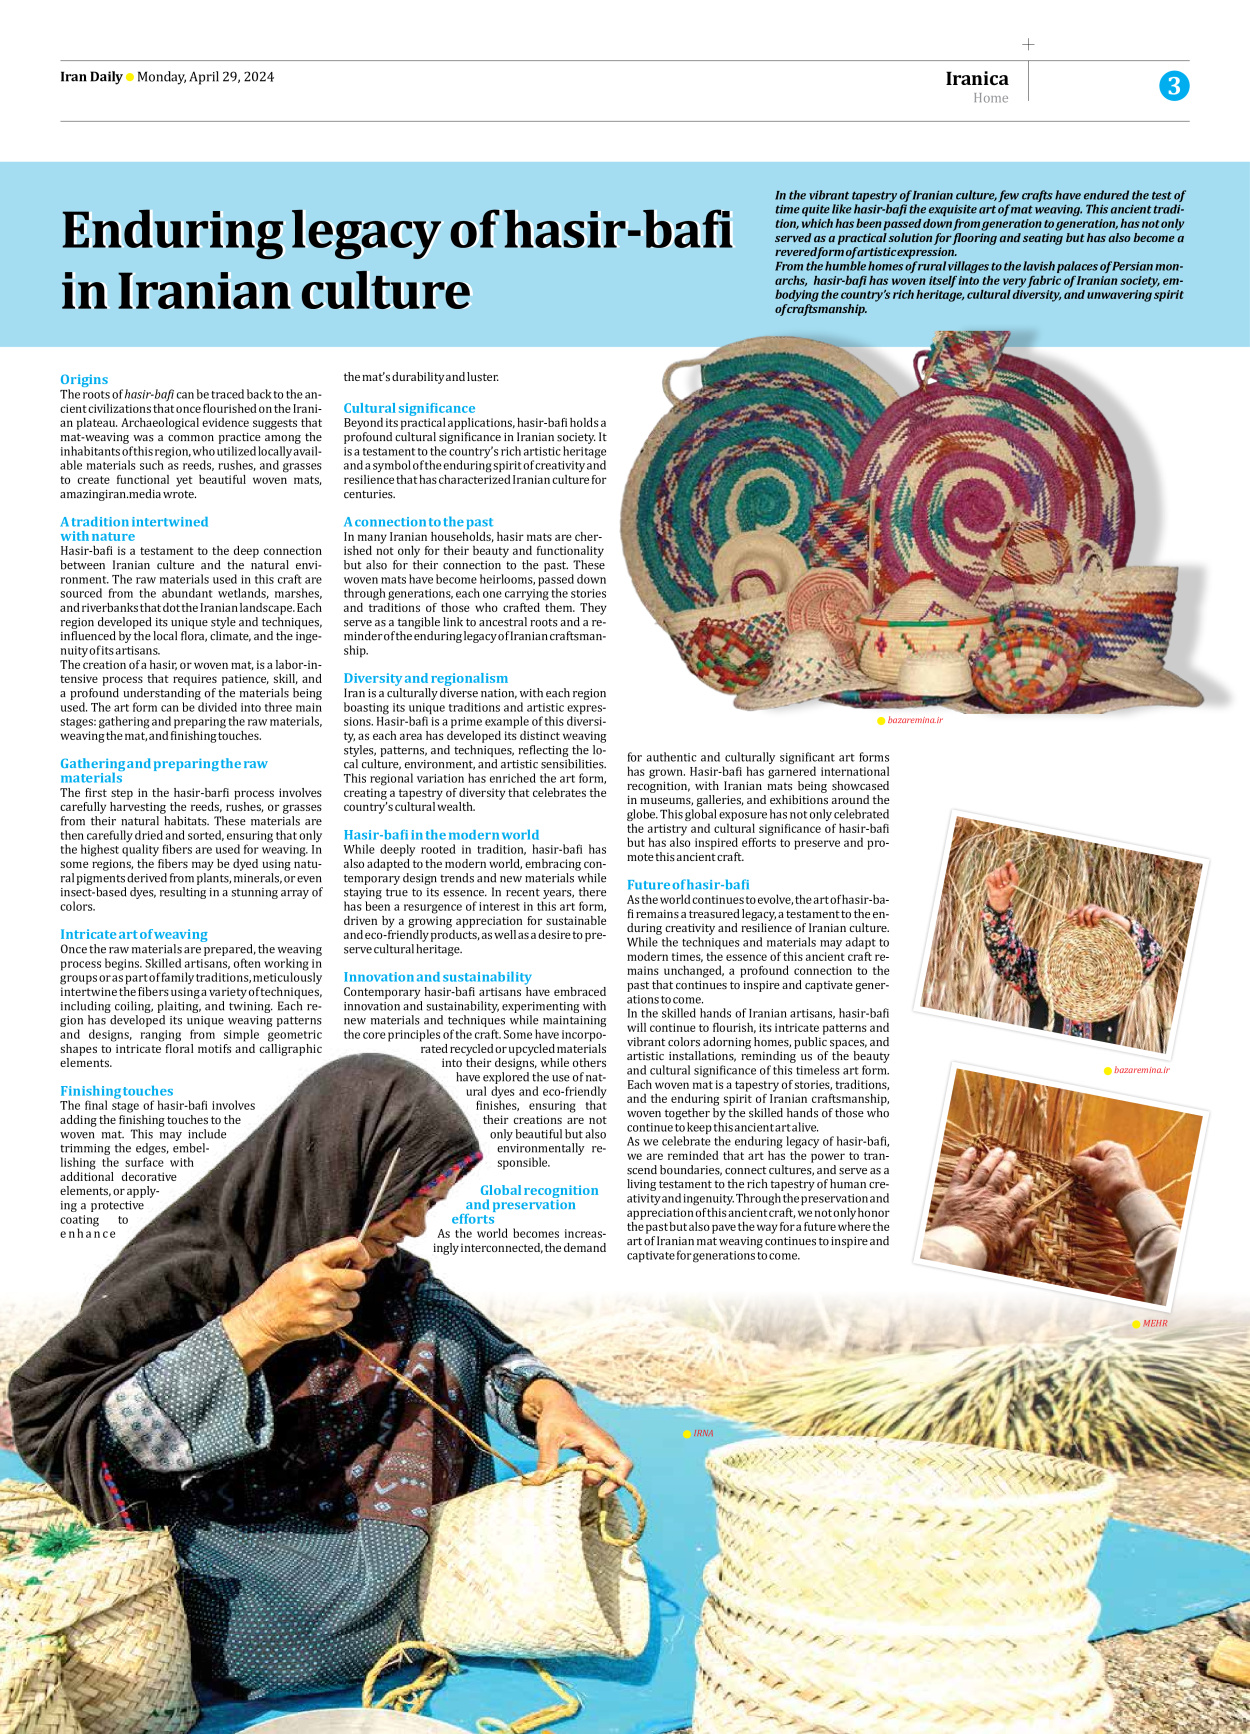 Iran Daily - Number Seven Thousand Five Hundred and Forty Five - 29 April 2024 - Page 3